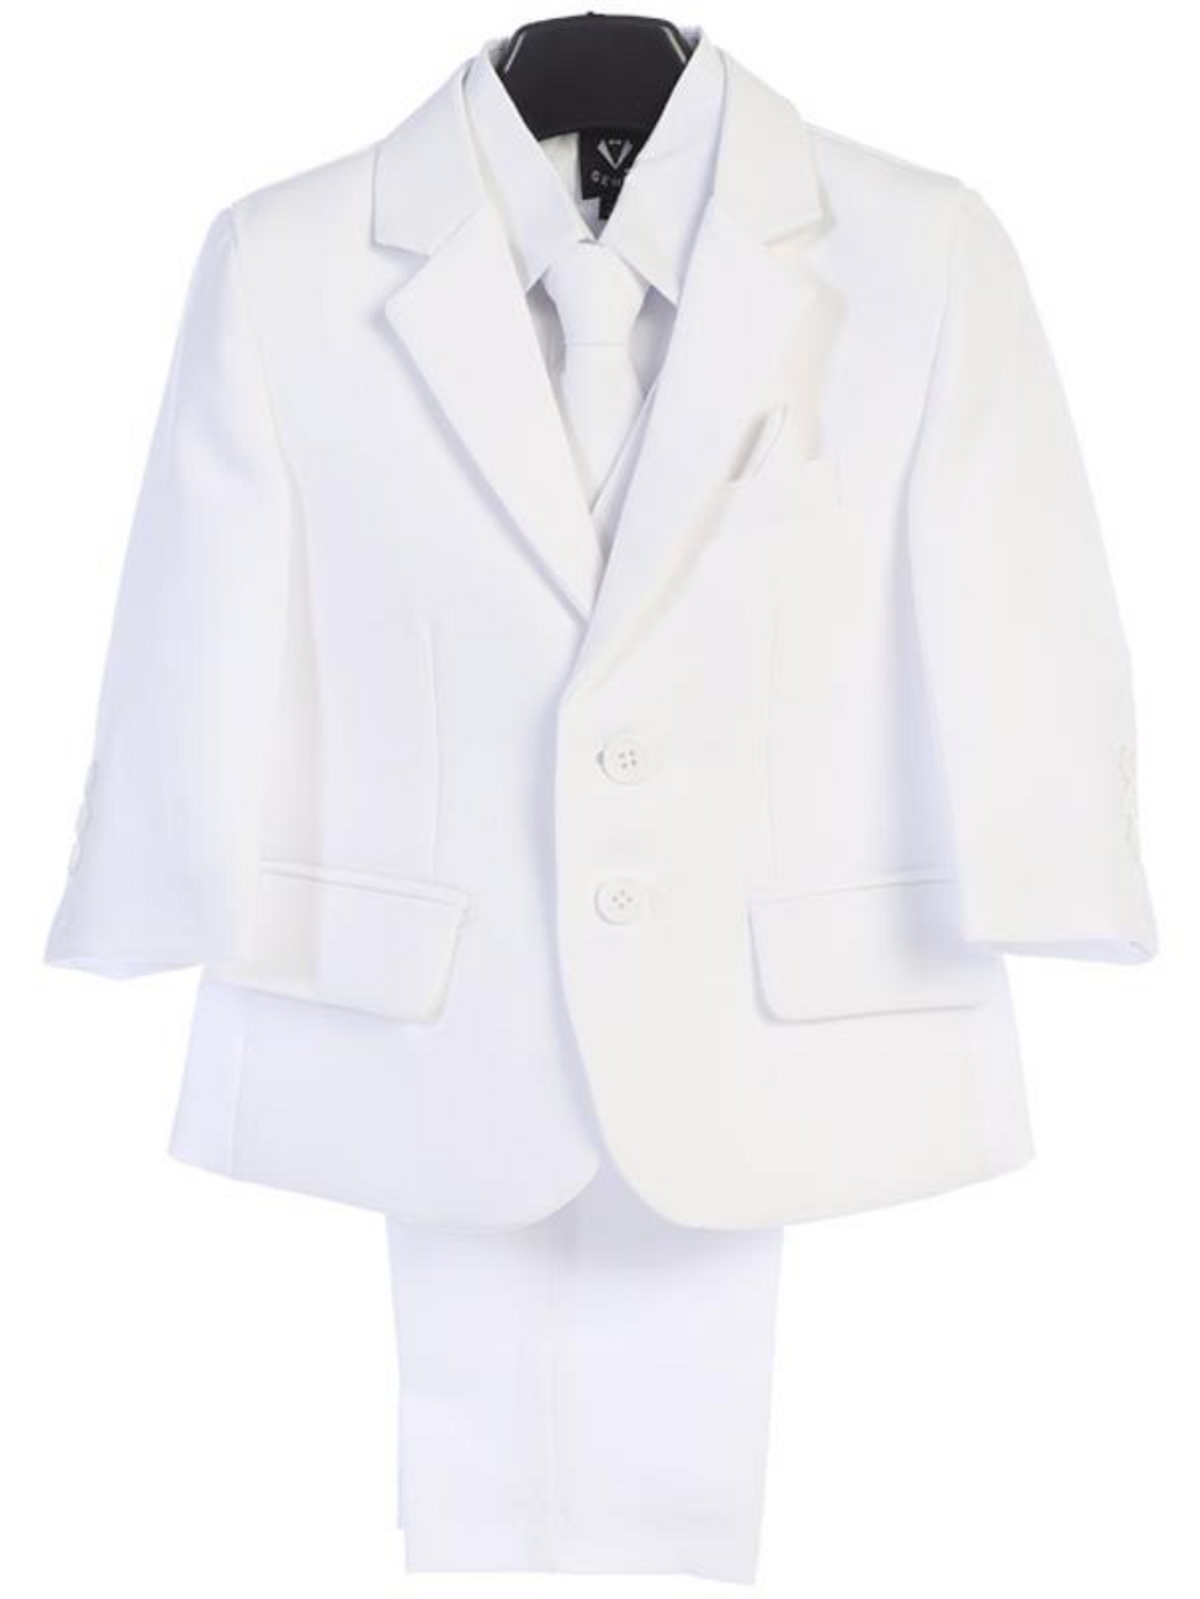 Suitor | White Tuxedo with Black Lapel Jacket | Buy Jackets Online | Suitor